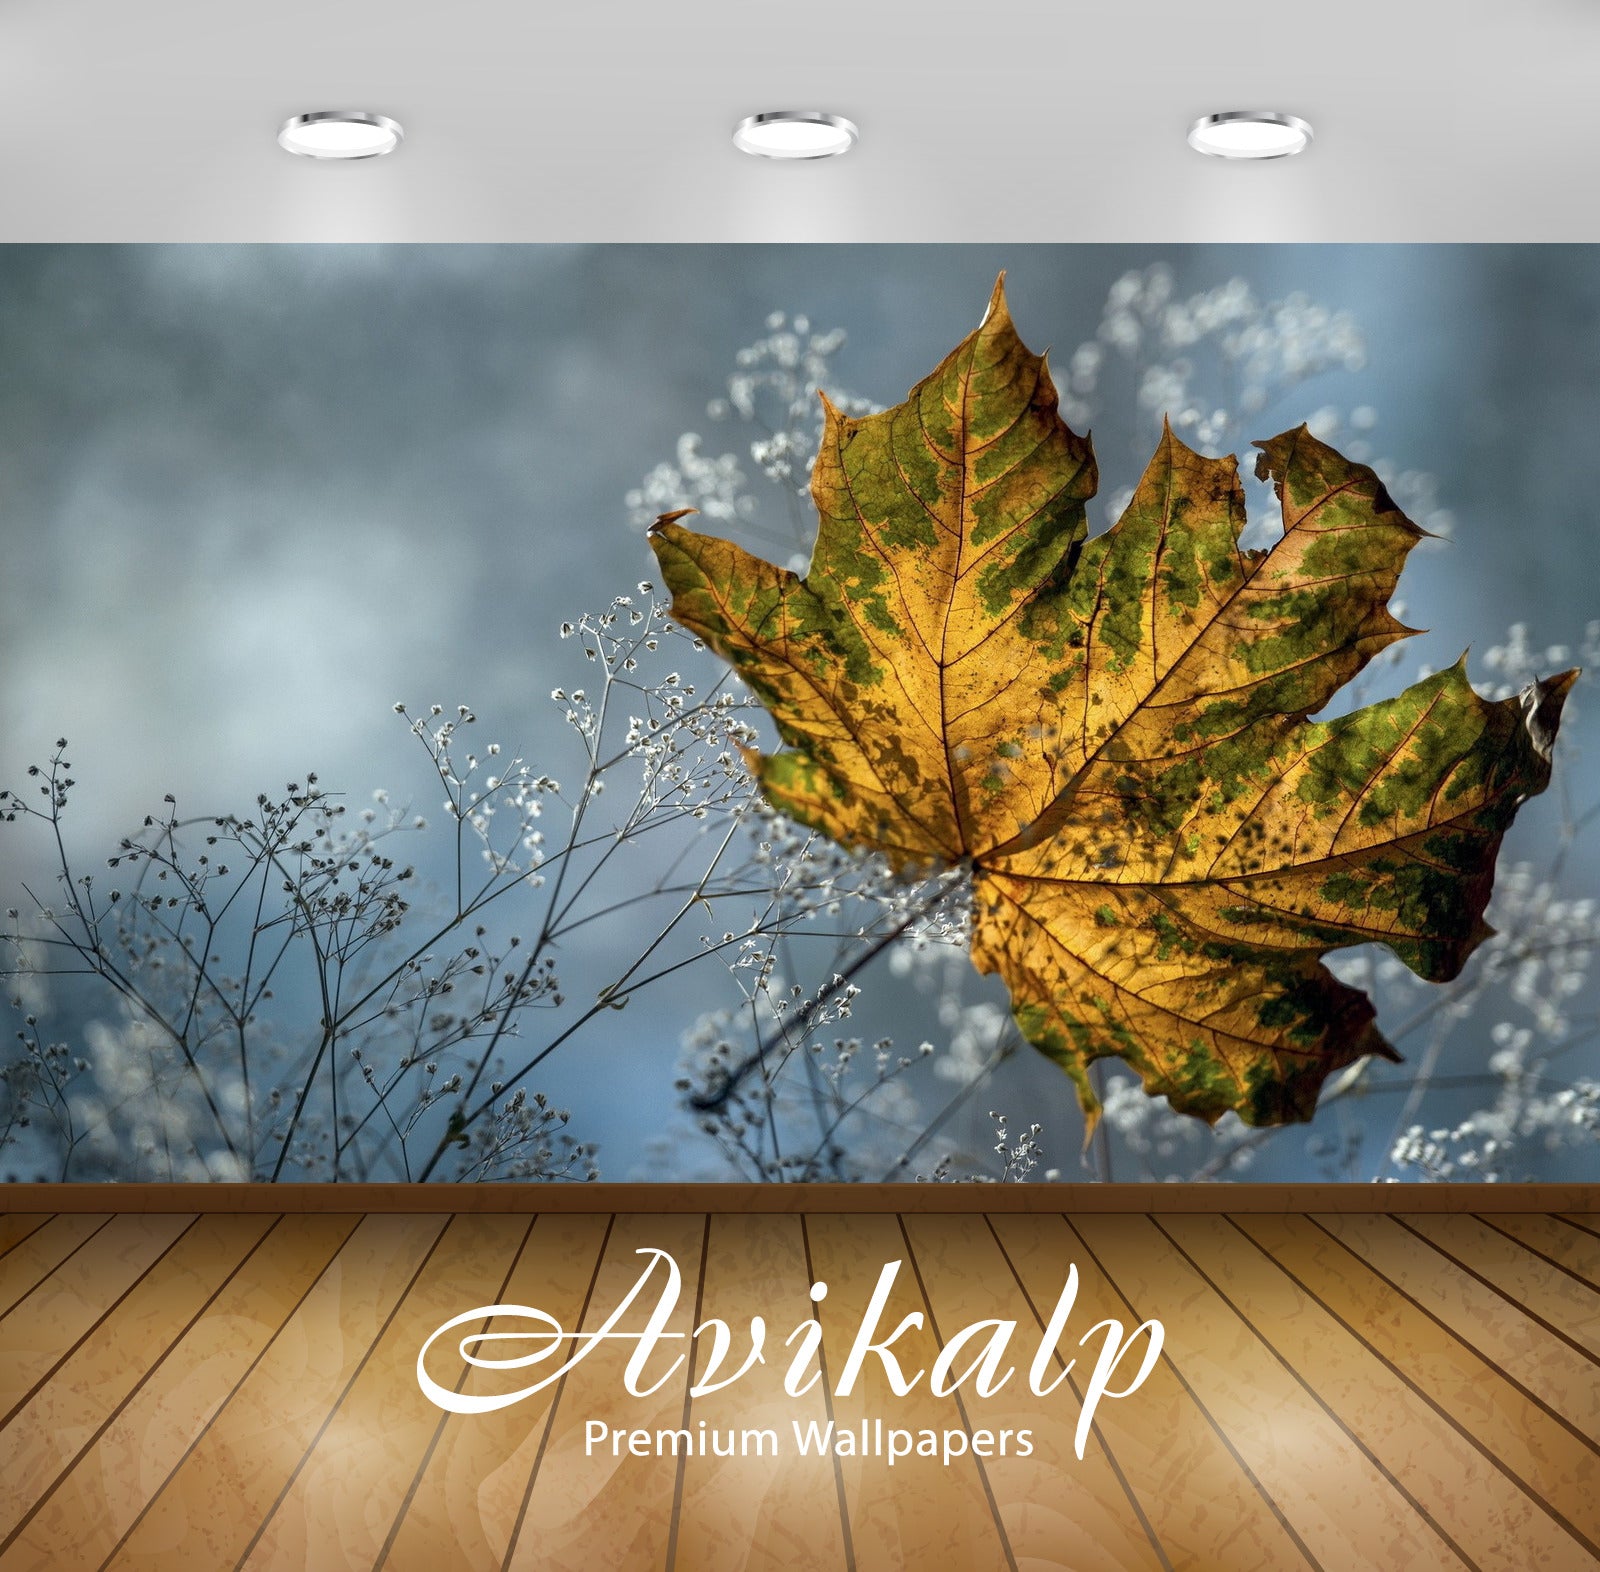 Avikalp Exclusive Awi1576 Beautiful Leaf Full HD Wallpapers for Living room, Hall, Kids Room, Kitche